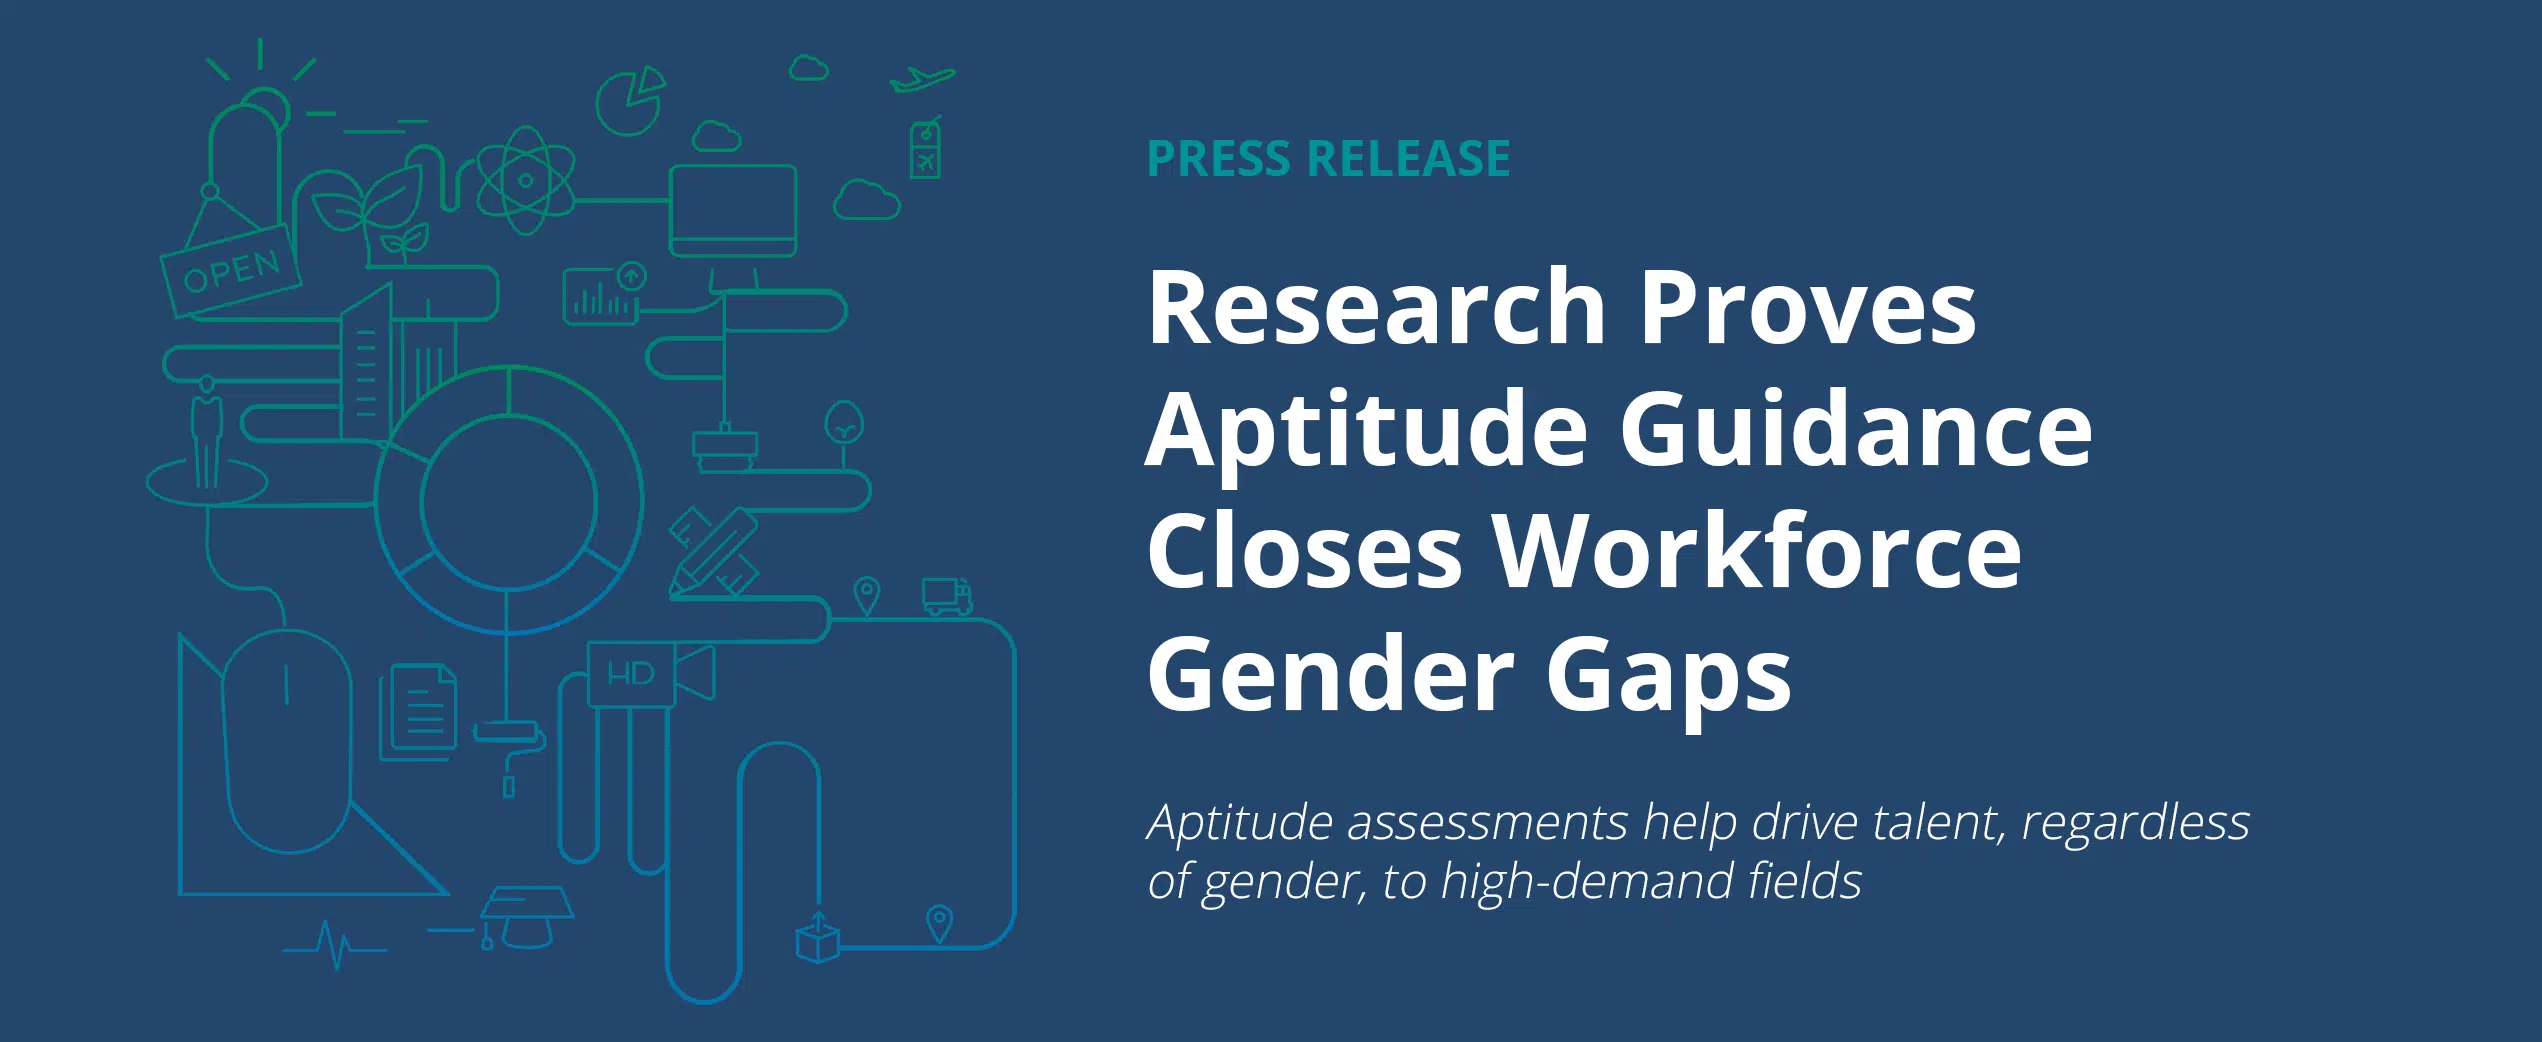 Research Proves Aptitude Guidance Closes Workforce Gender Gaps